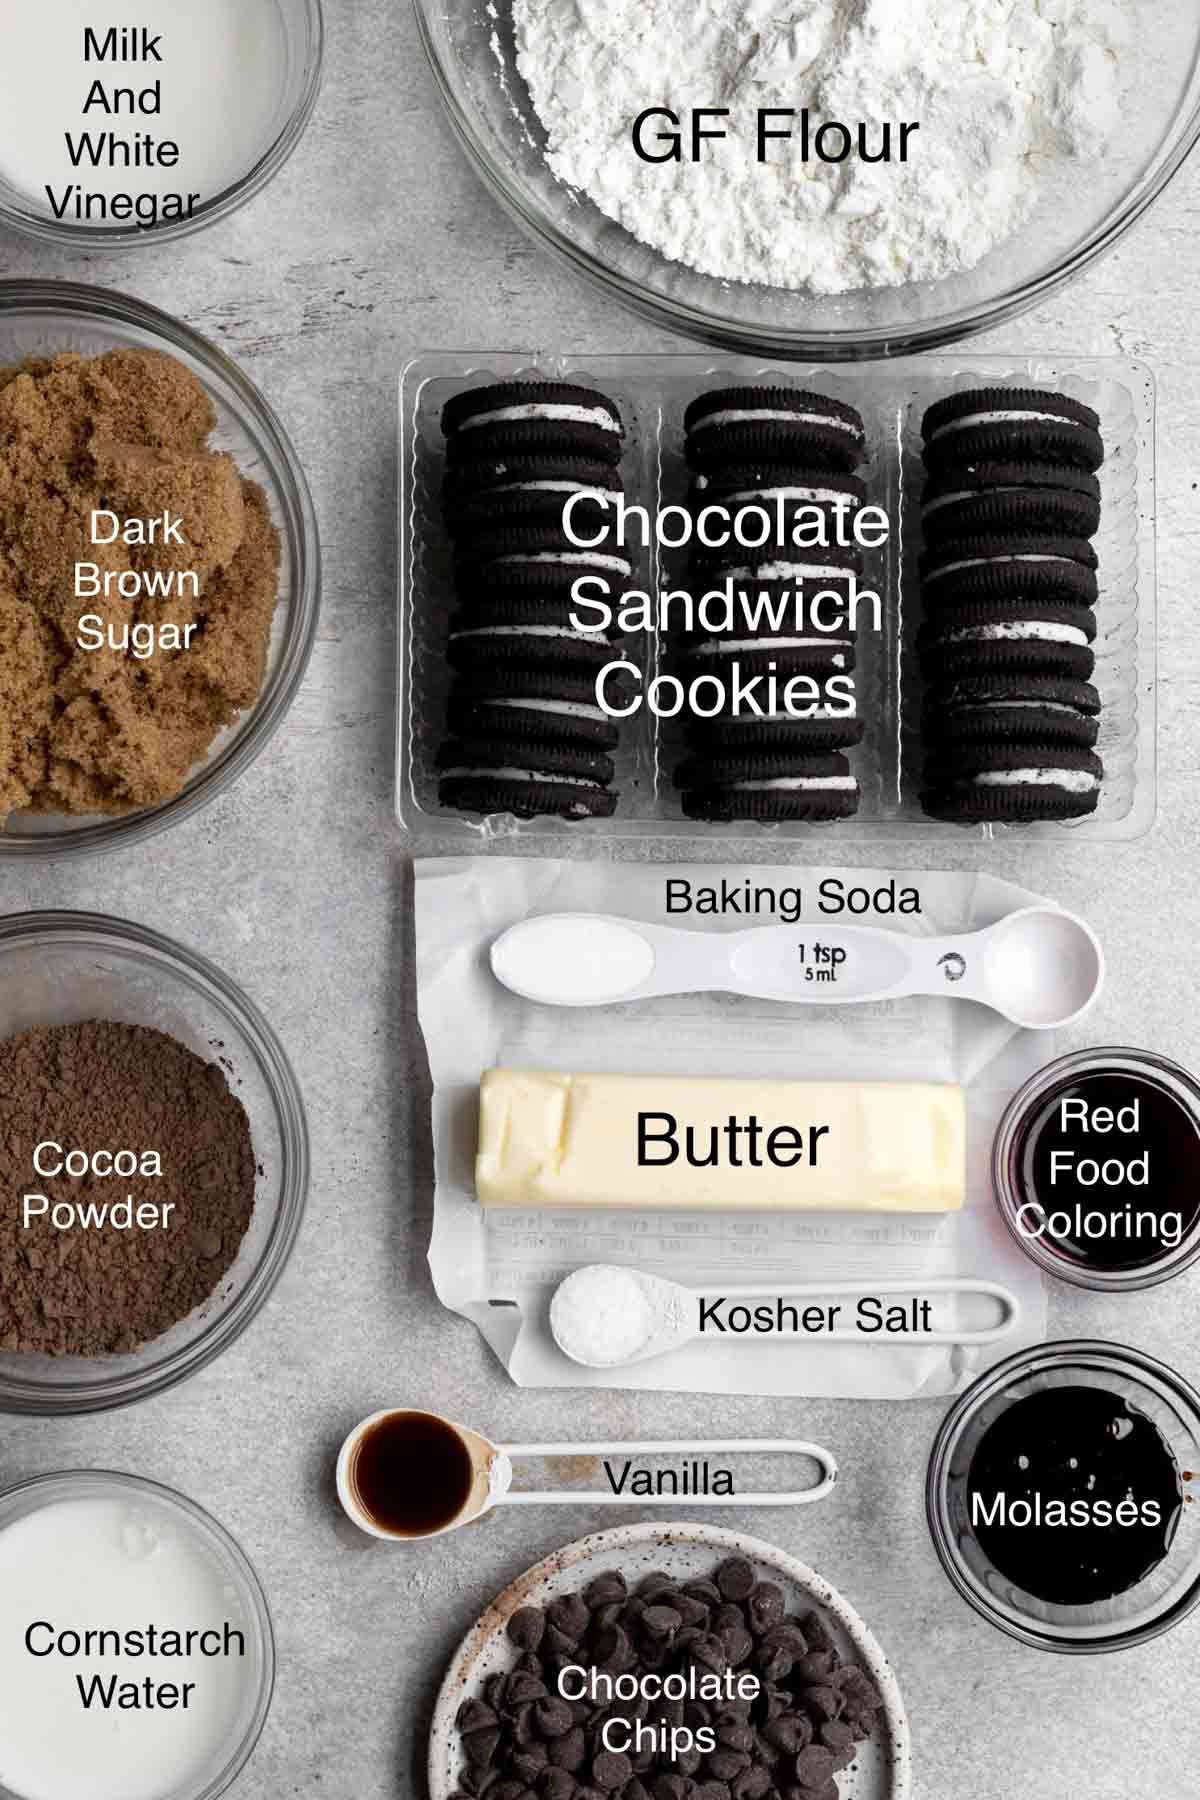 The ingredients for the red velvet oreo cookies with their text names.